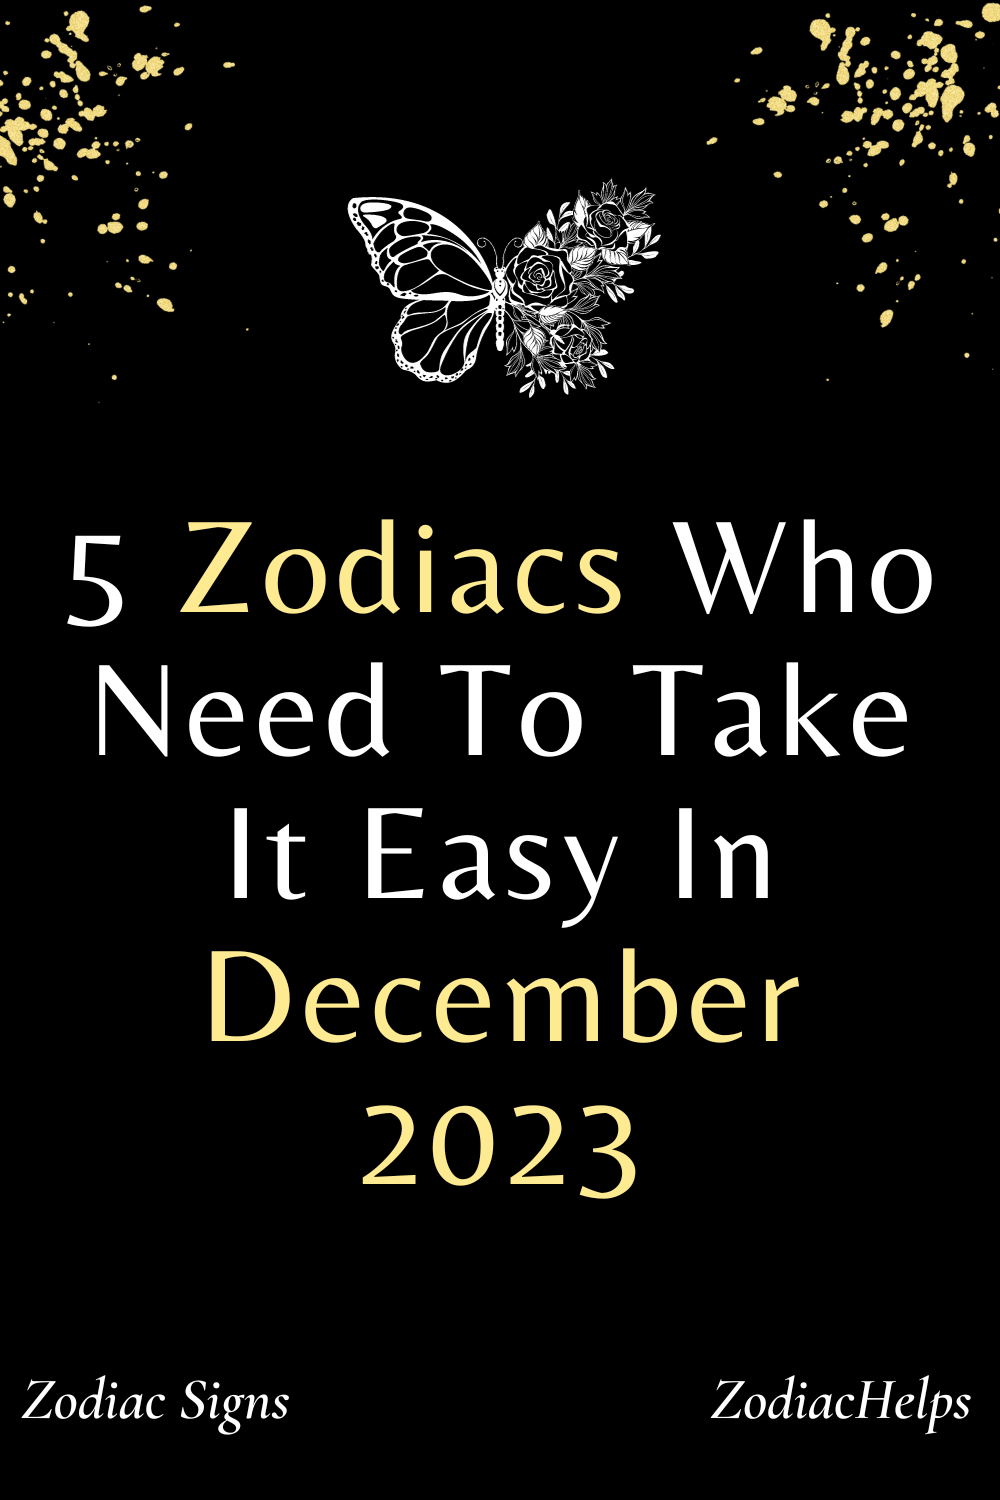 5 Zodiacs Who Need To Take It Easy In December 2023